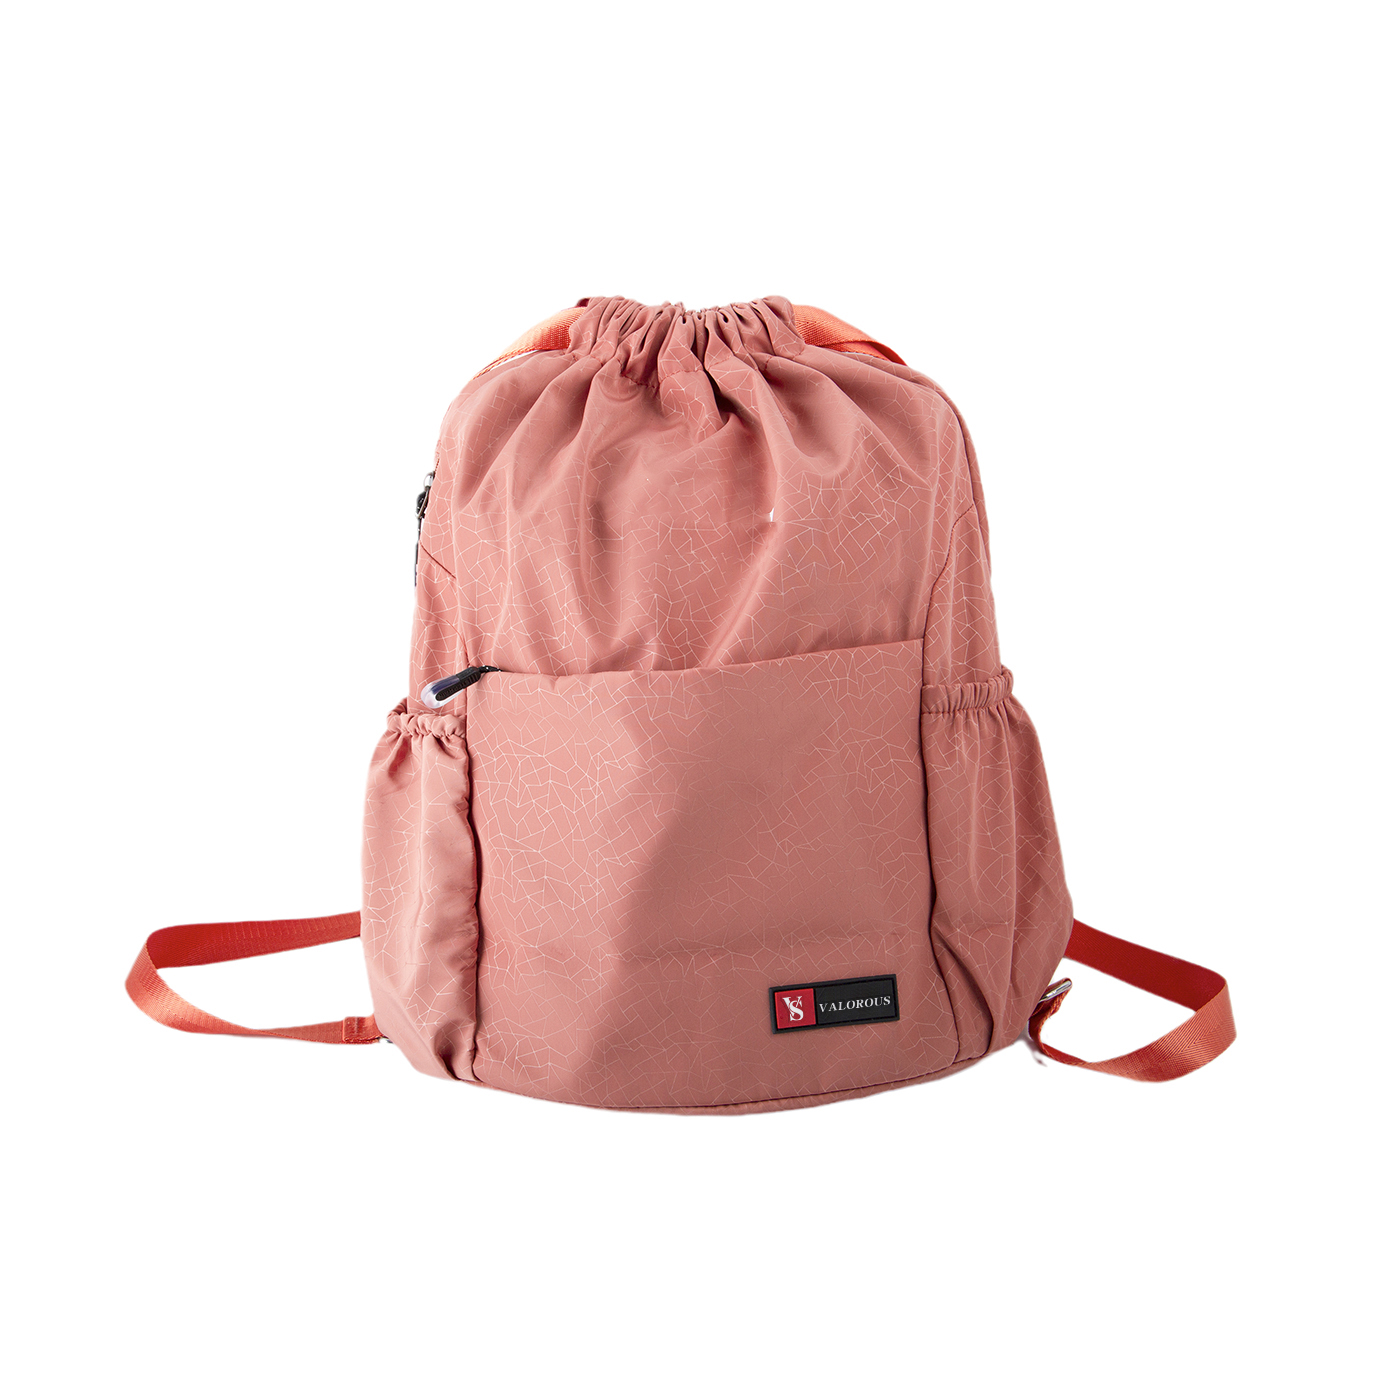 Drawstring Backpack With Front Zipper Pocket1